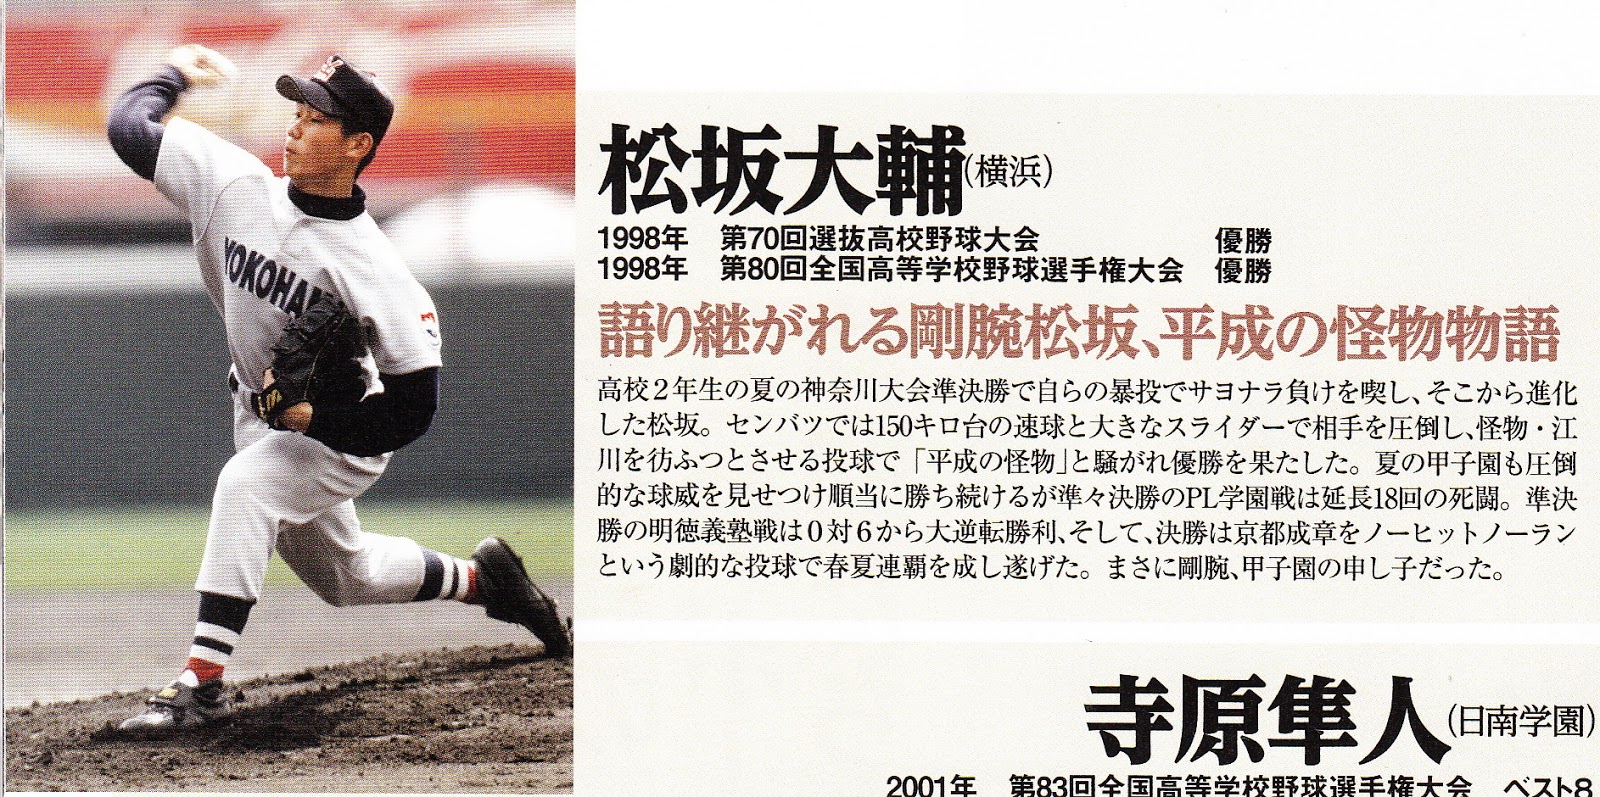 Japanese Baseball Cards Card Of The Week August 19